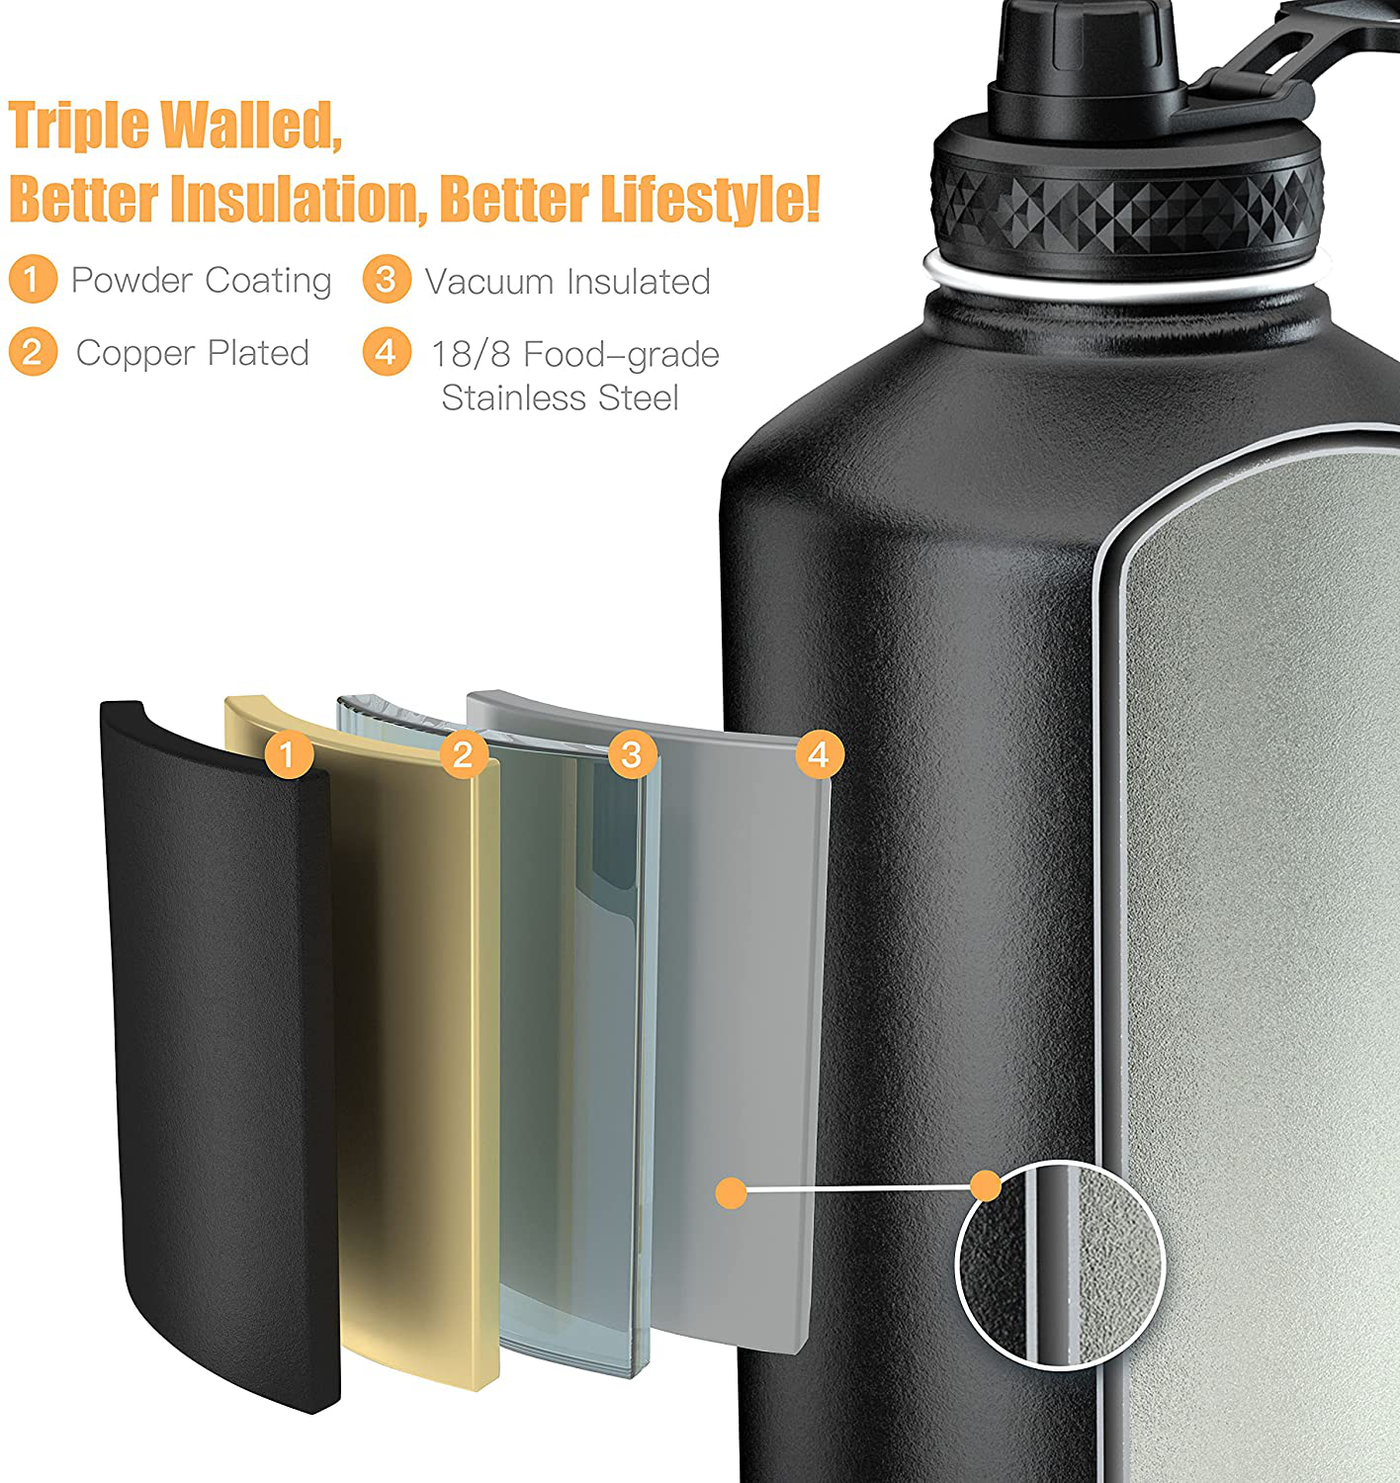 64 oz Insulated Water Bottle, Topre Half Gallon Vacuum Stainless Steel Sports Water Jug with 3 Lids & Brushes, BPA-free Reusable Triple Walled Thermo Mug Canteen for Sports Outdoor Camping, Black